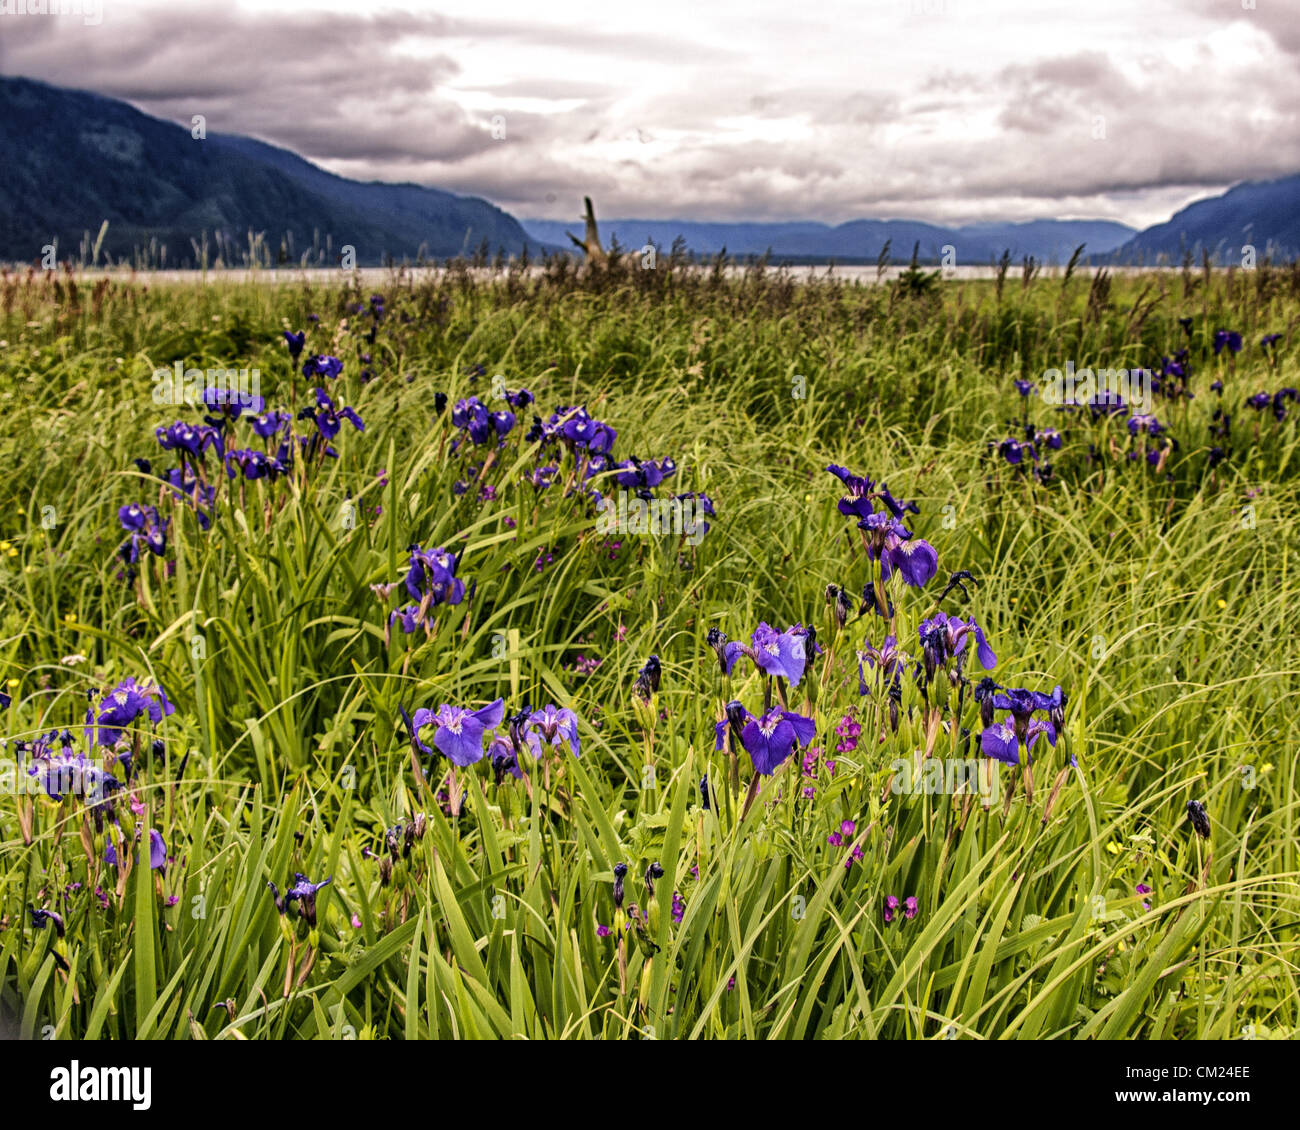 July 4, 2012 - Haines, Alaska, US - Wildflowers grow in profusion along the river banks near the mouth of the Chilkat Inlet. Photo shows Wild Iris [iris setosa] in bloom amid wild grasses. (Credit Image: © Arnold Drapkin/ZUMAPRESS.com) Stock Photo